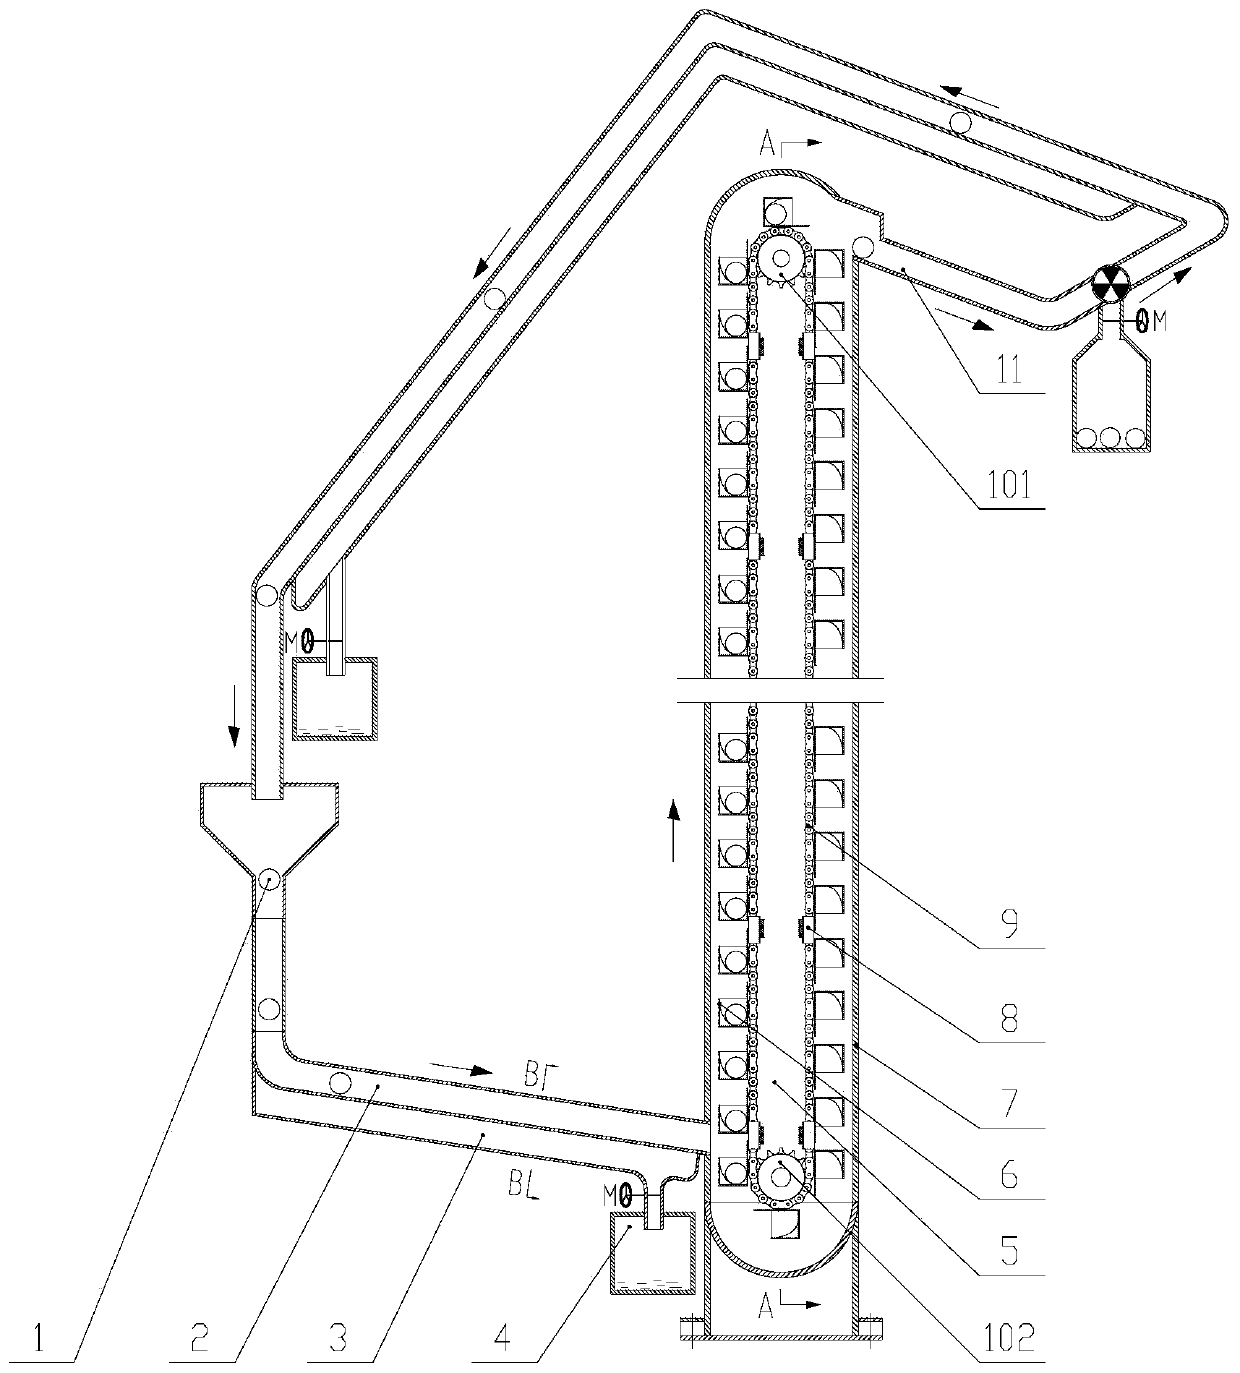 Waterwheel-like chain-box-type vertical fuel conveying device